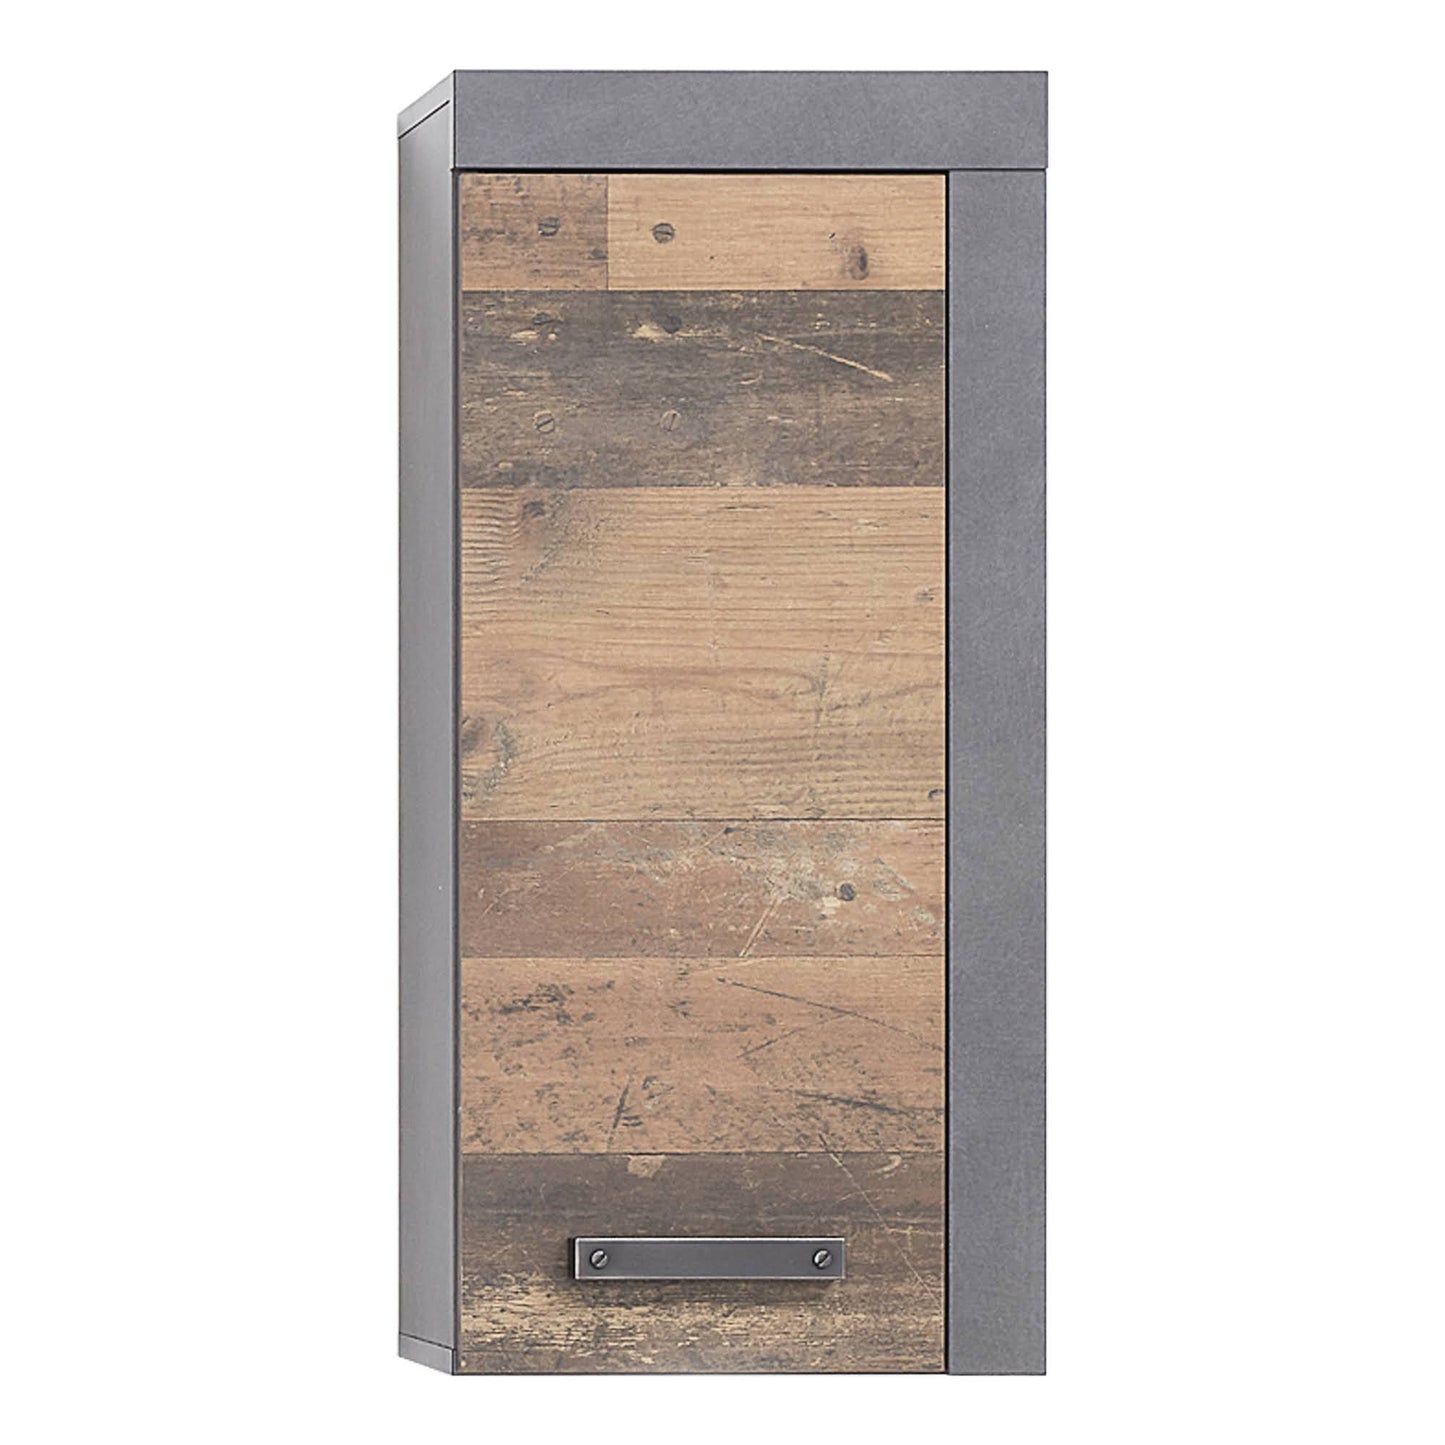 Nancy's Chicalote Bathroom Cabinet - Storage Cabinet - Brown and Gray - 33 x 79 x 23 cm